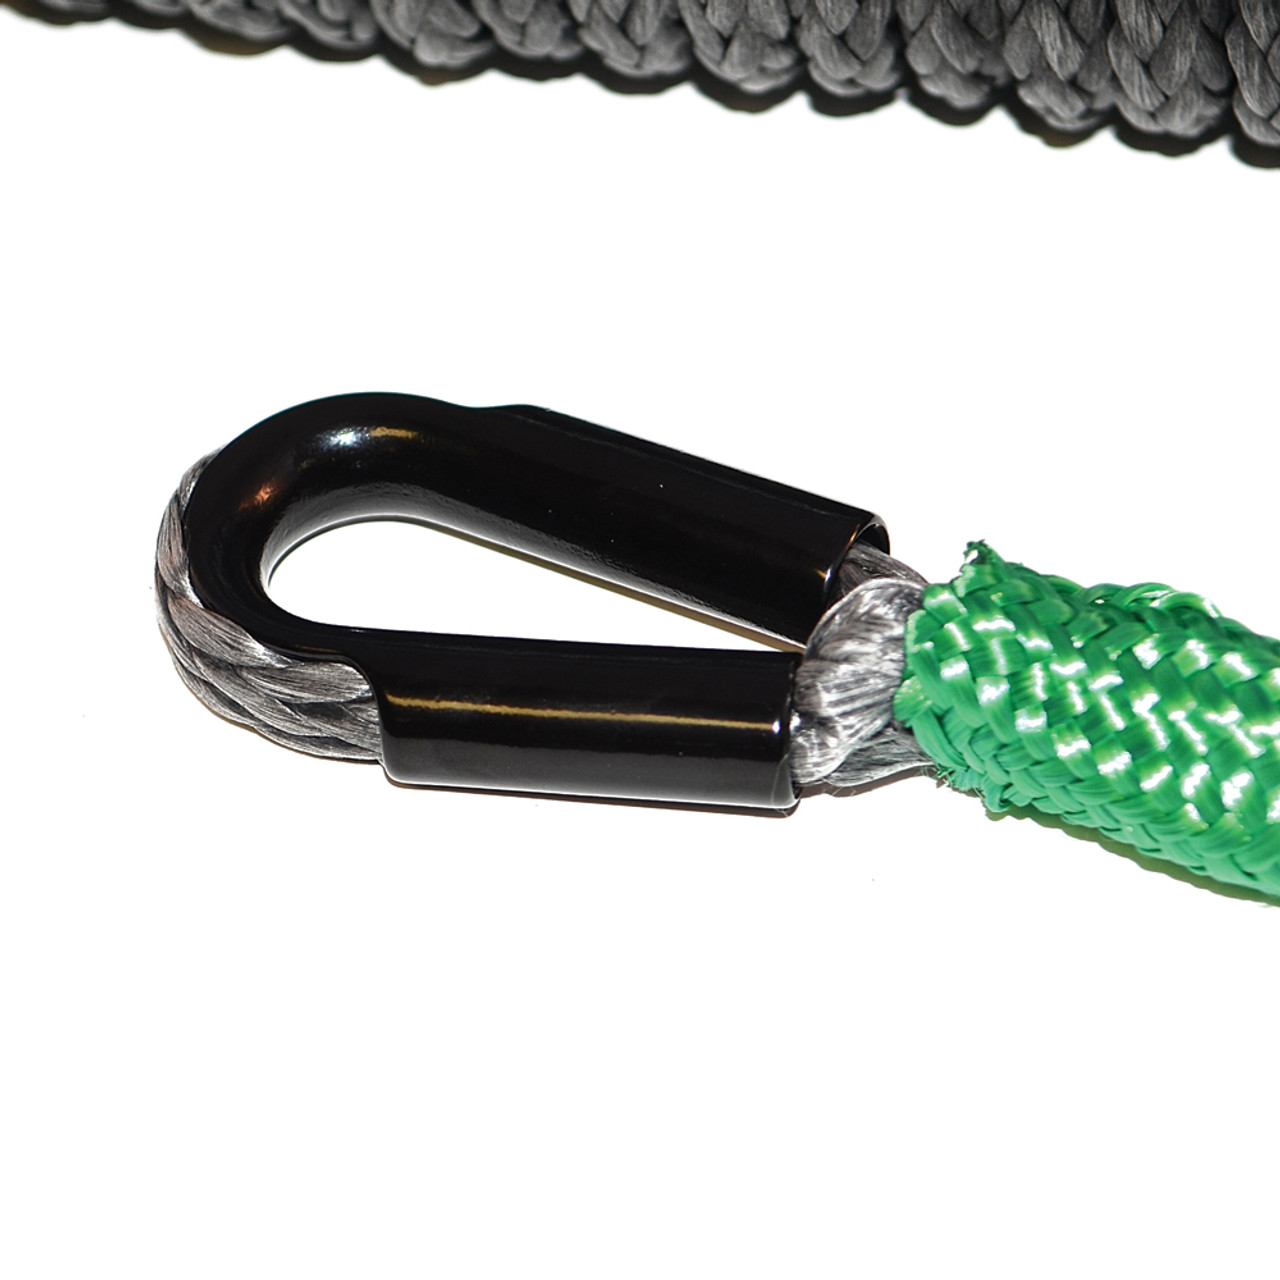 Synthetic Winch Rope with Hook 11/32 x 100